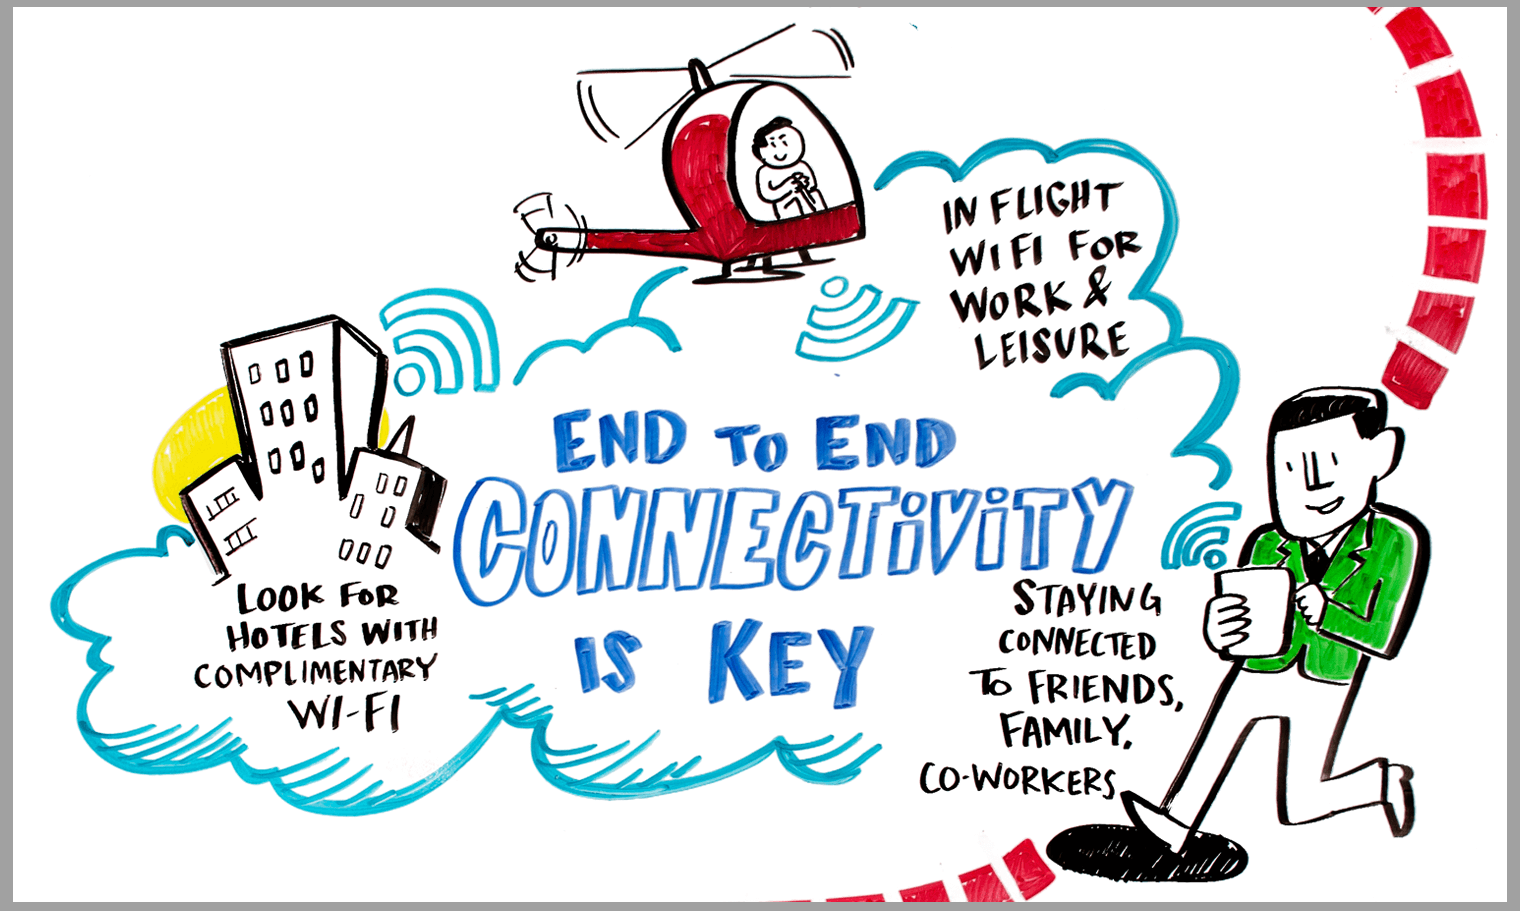 ImageThink created a large scale infographic for amex's 2016 GBTA trade show booth, which ignited engagement for conference attendees, including the importance of end to end connectivity for business travelers.